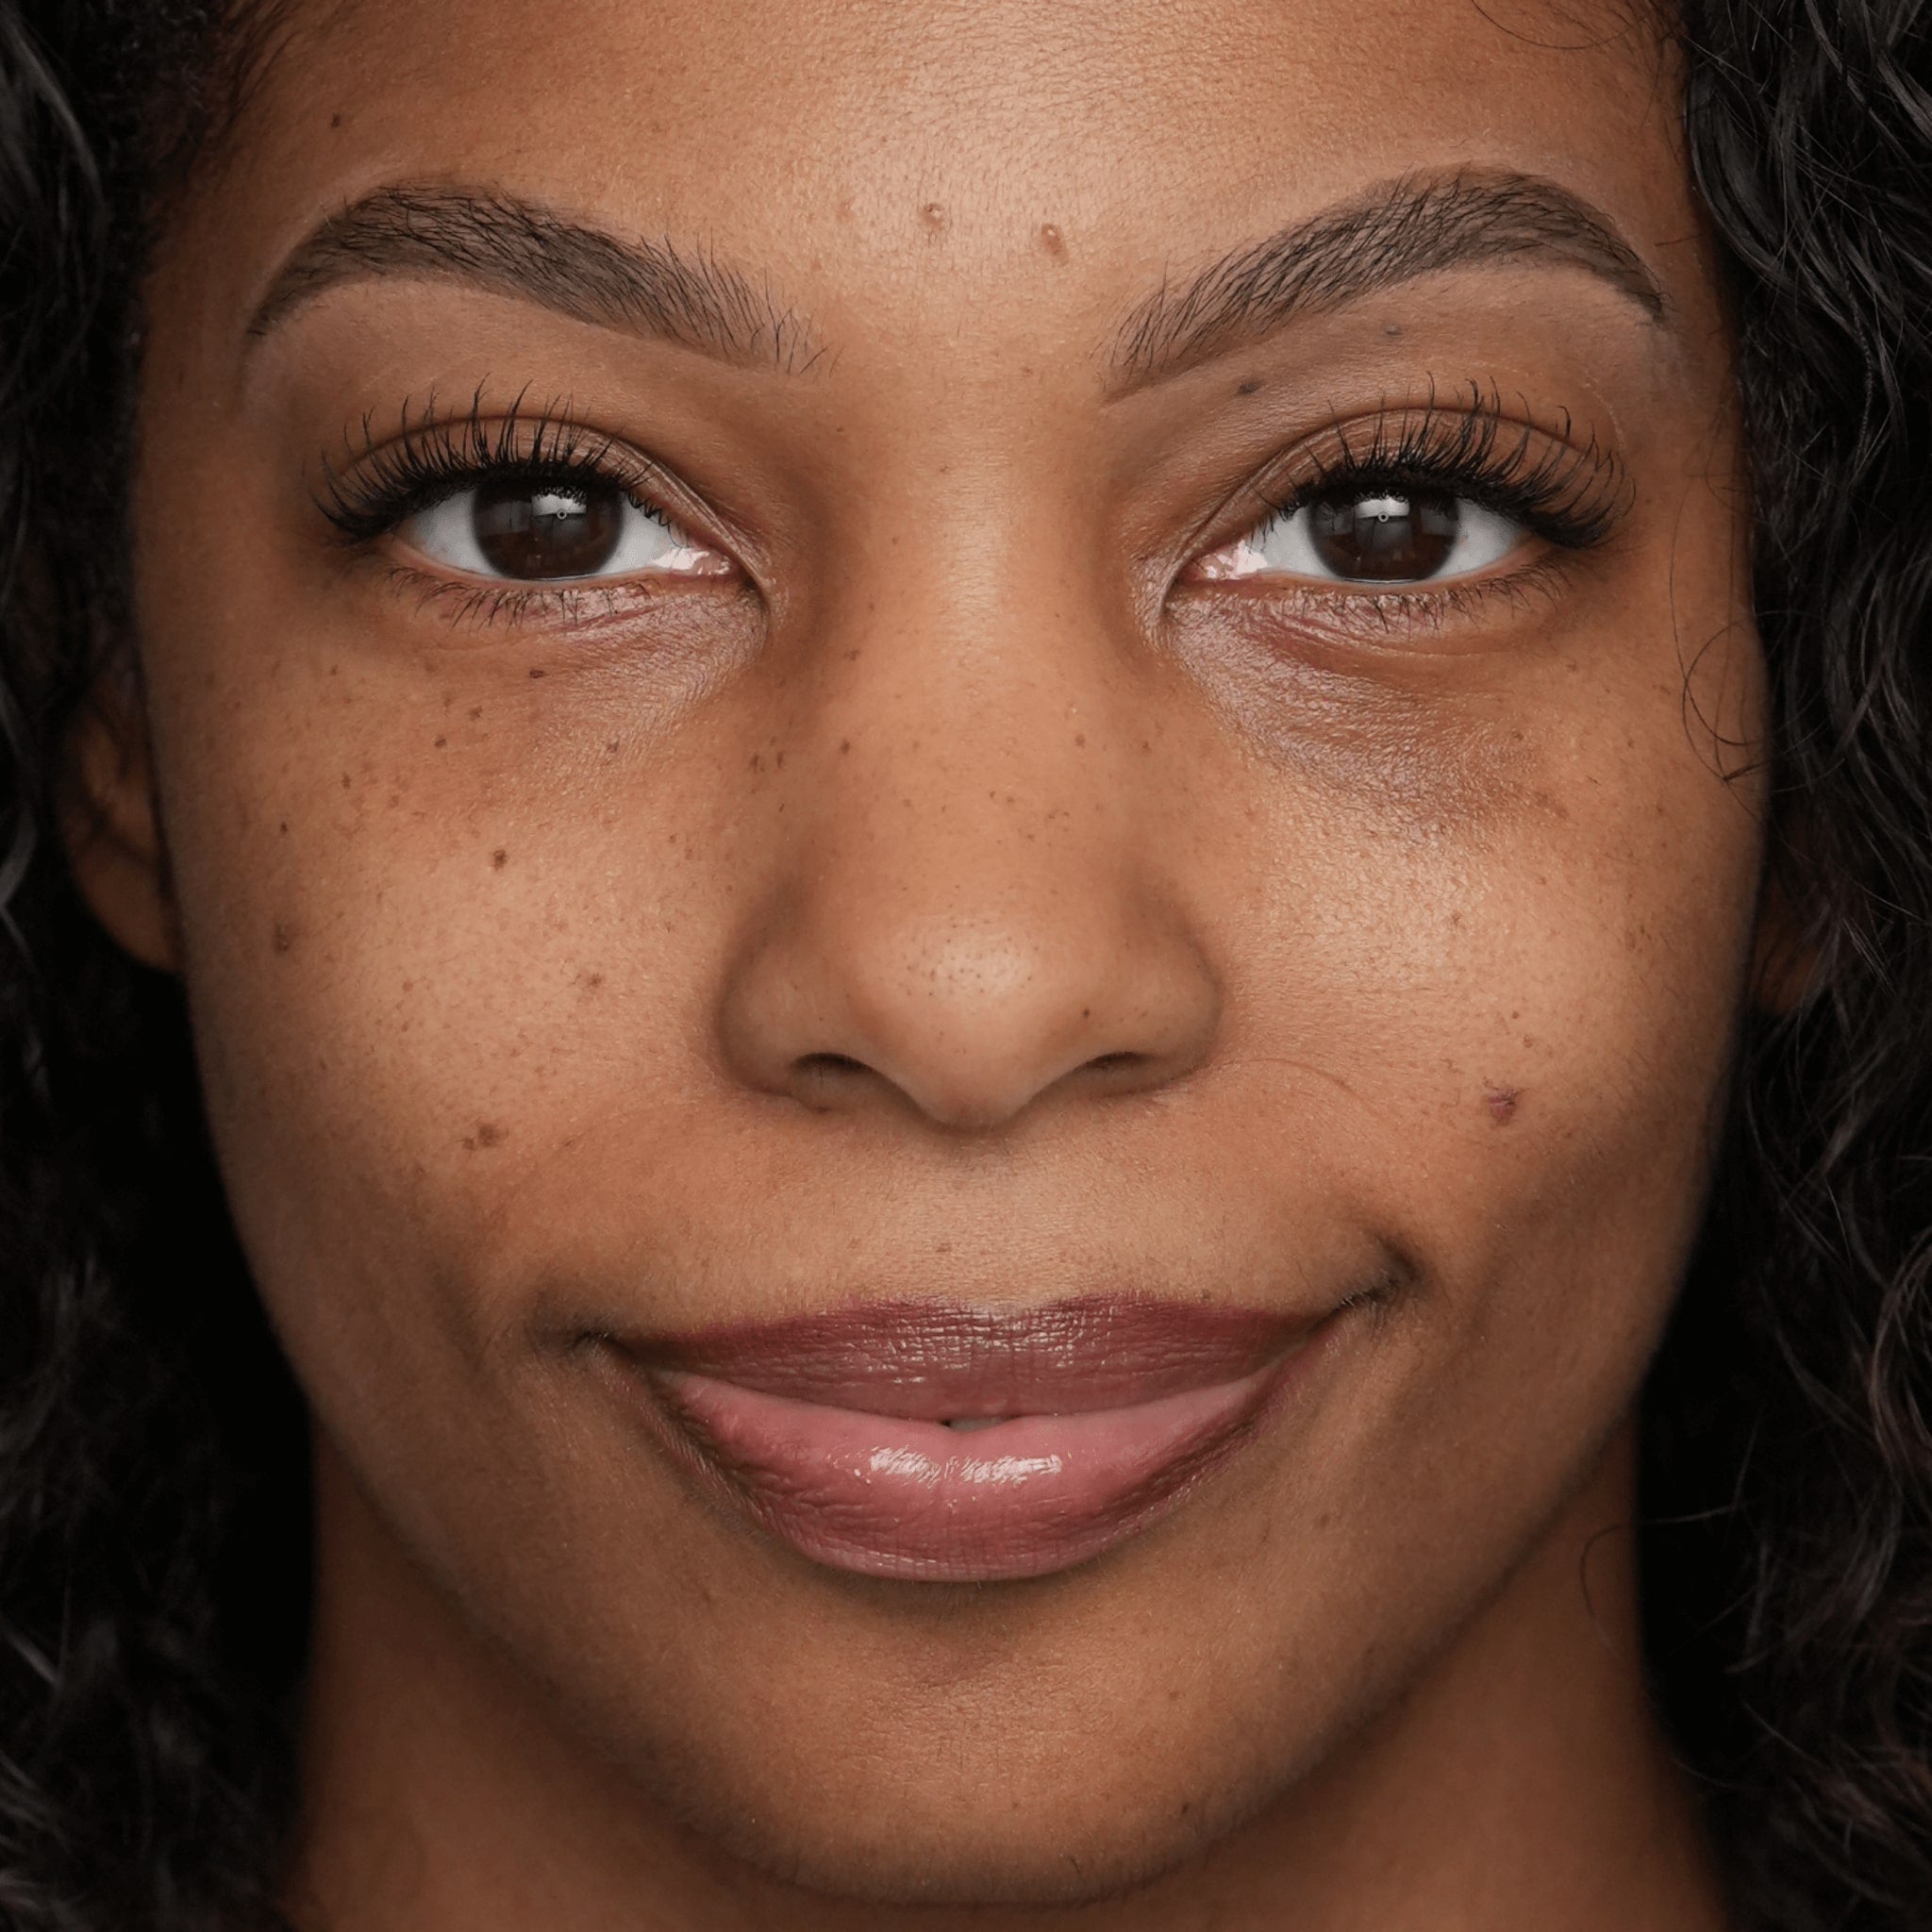 Close up of a woman's face and skin